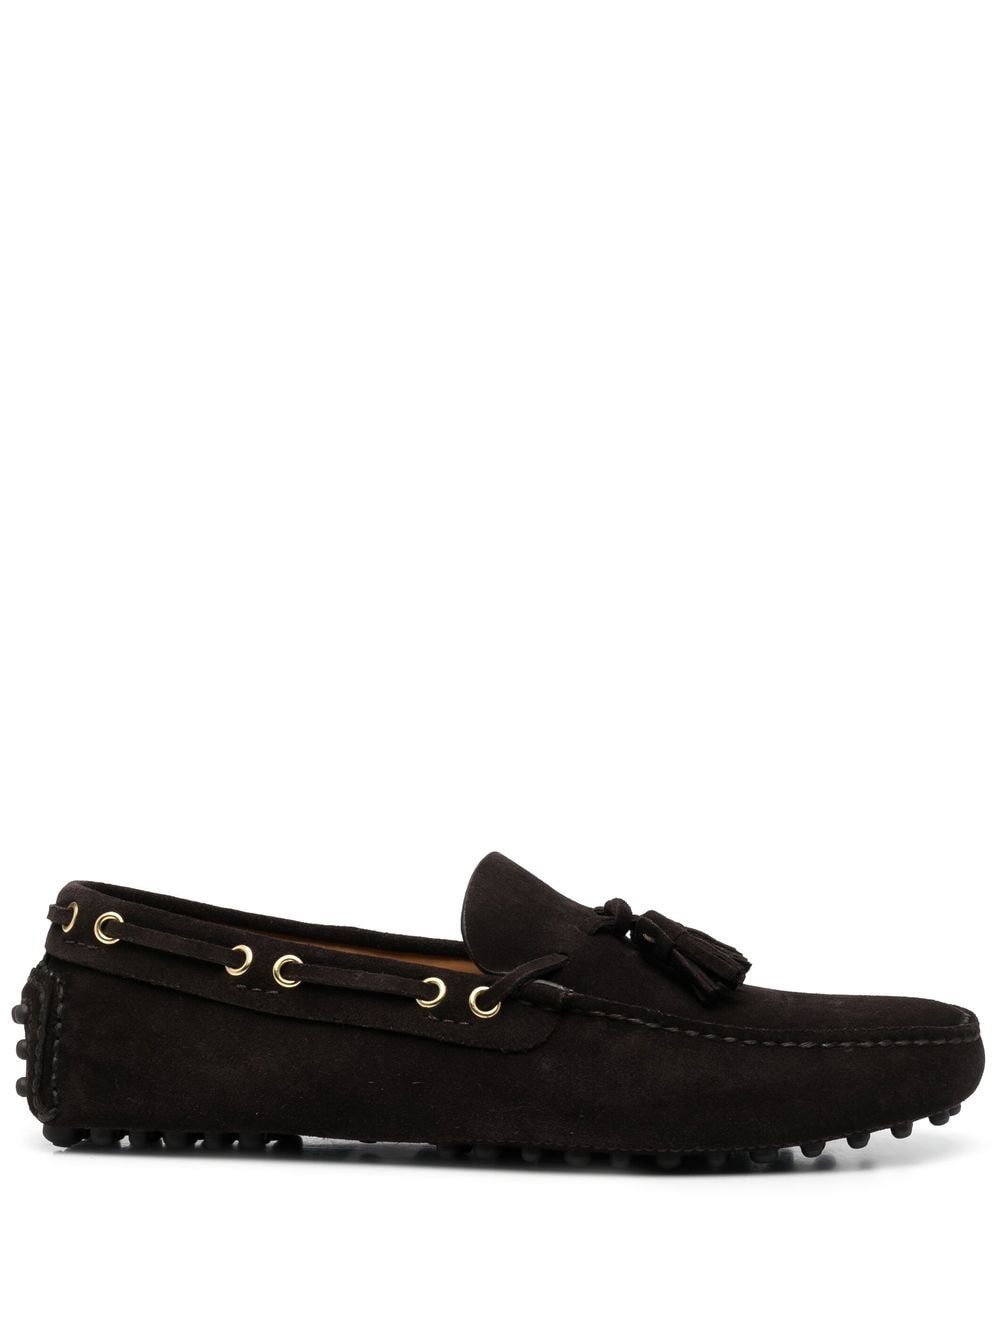 Car Shoe tasselled leather loafers - Brown von Car Shoe